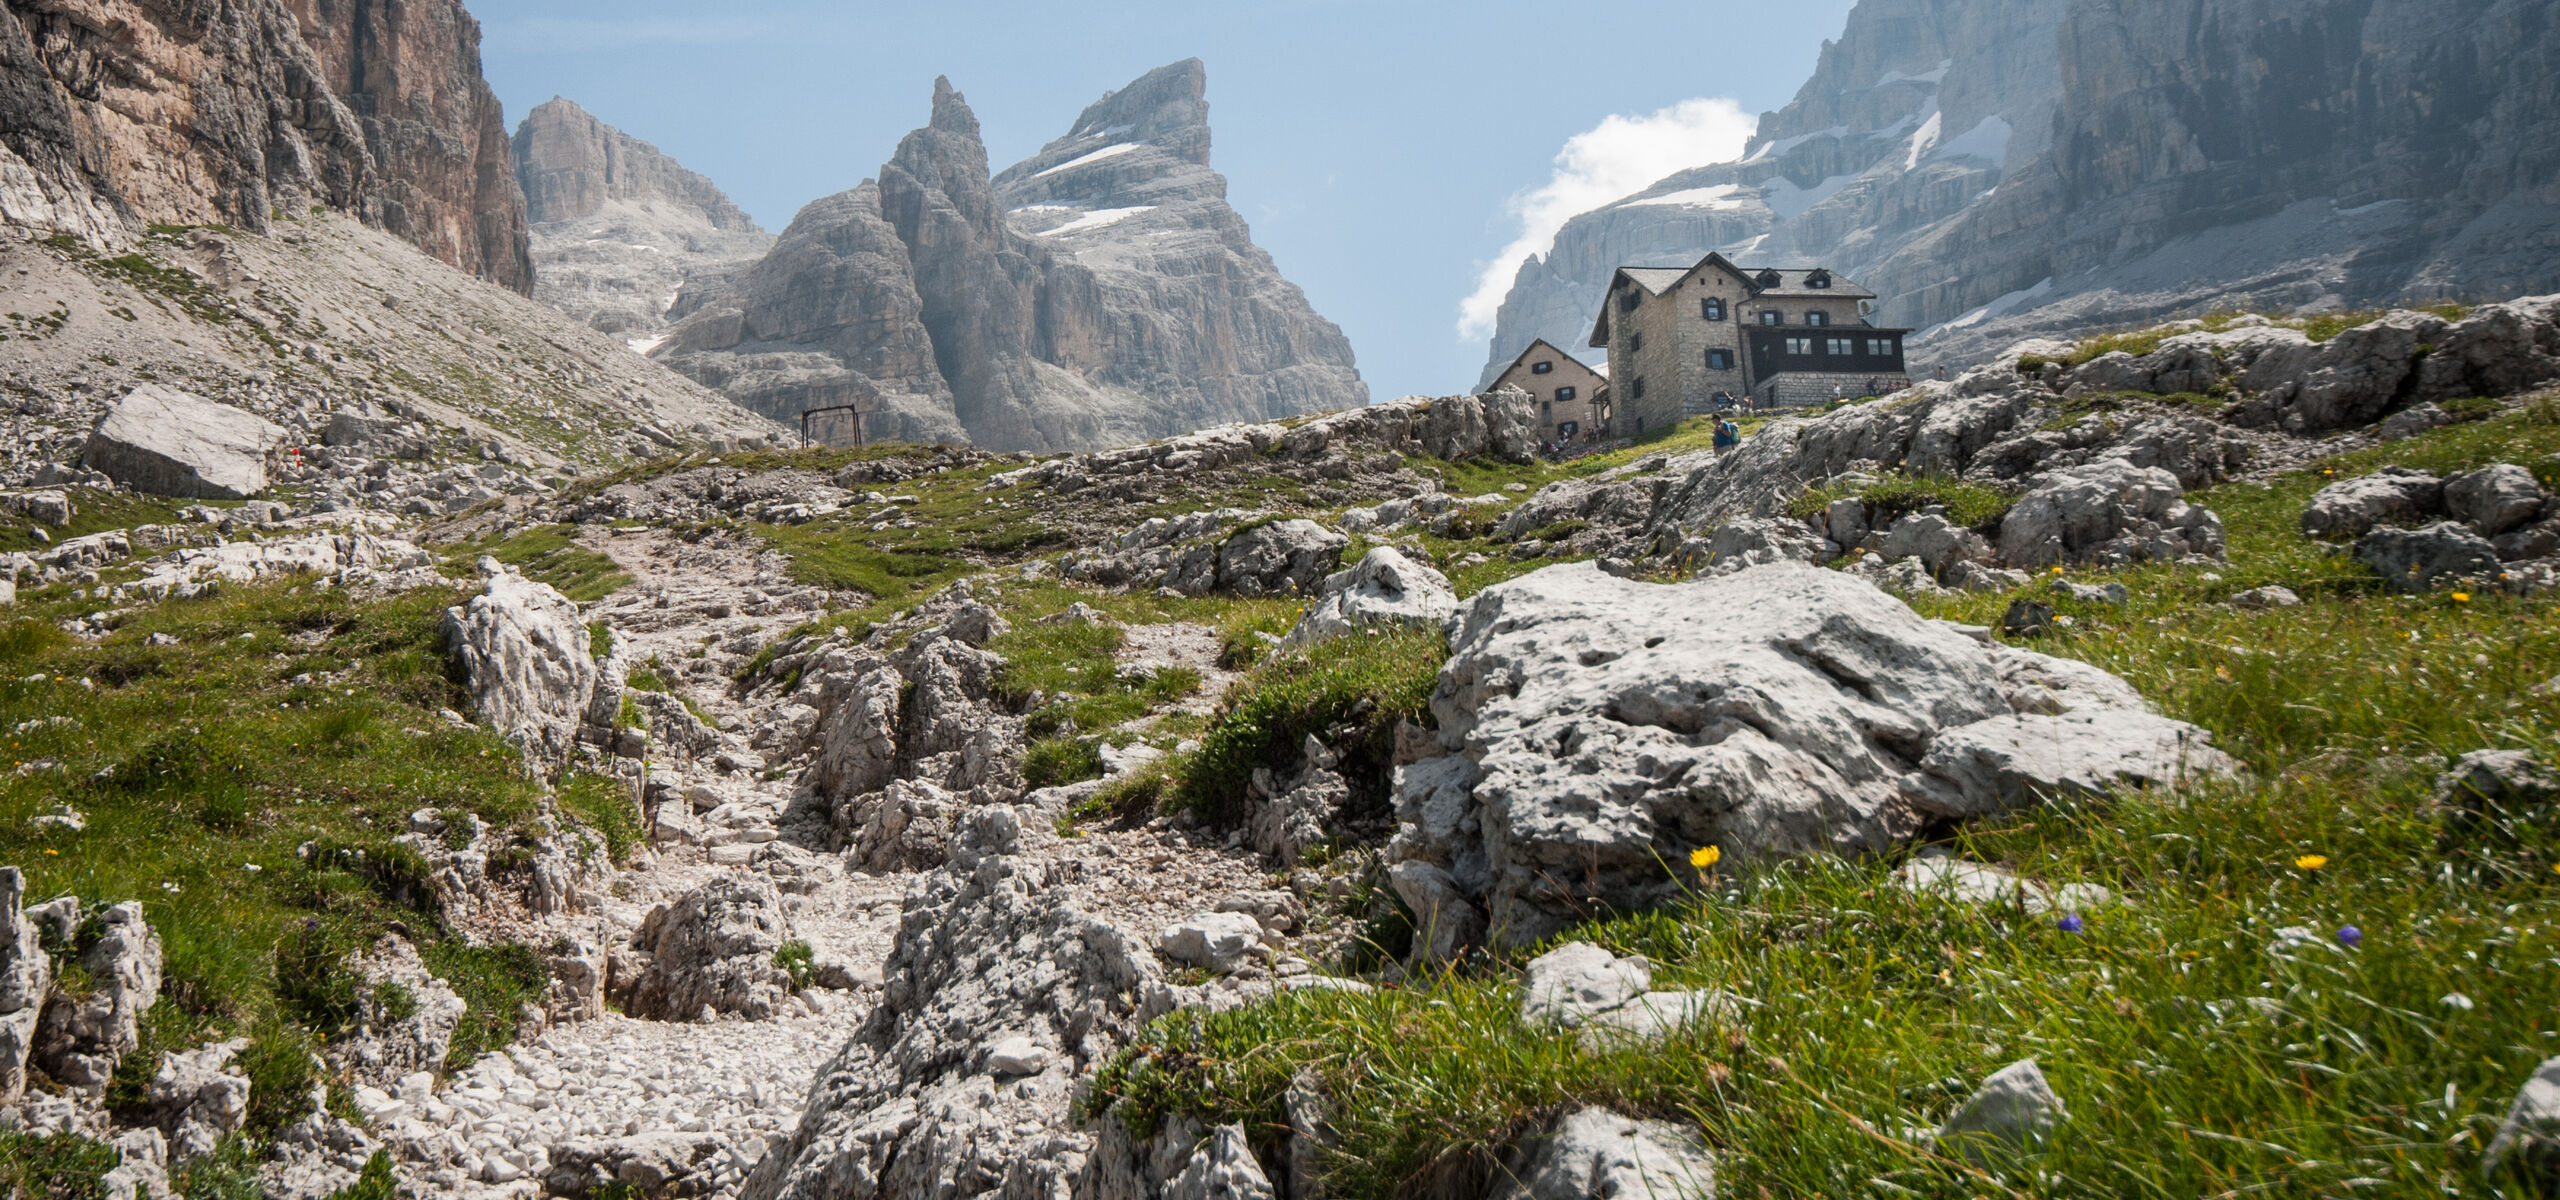 Brenta Dolomites: what to see and do